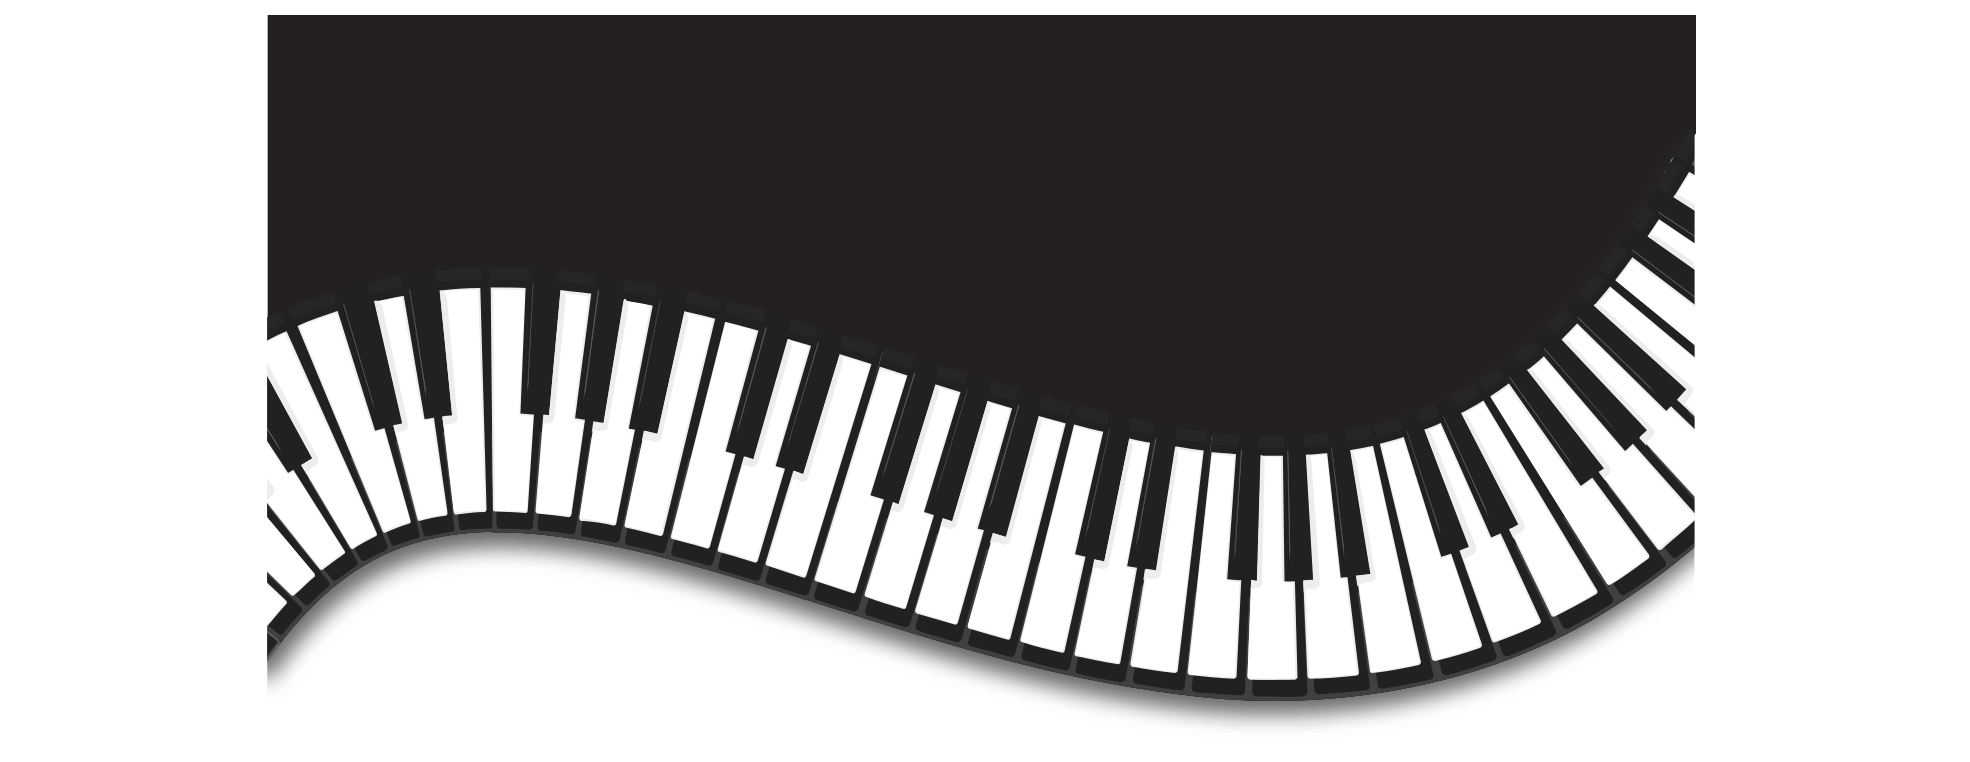 Picture Piano Music Keyboard Free Download PNG HQ PNG Image